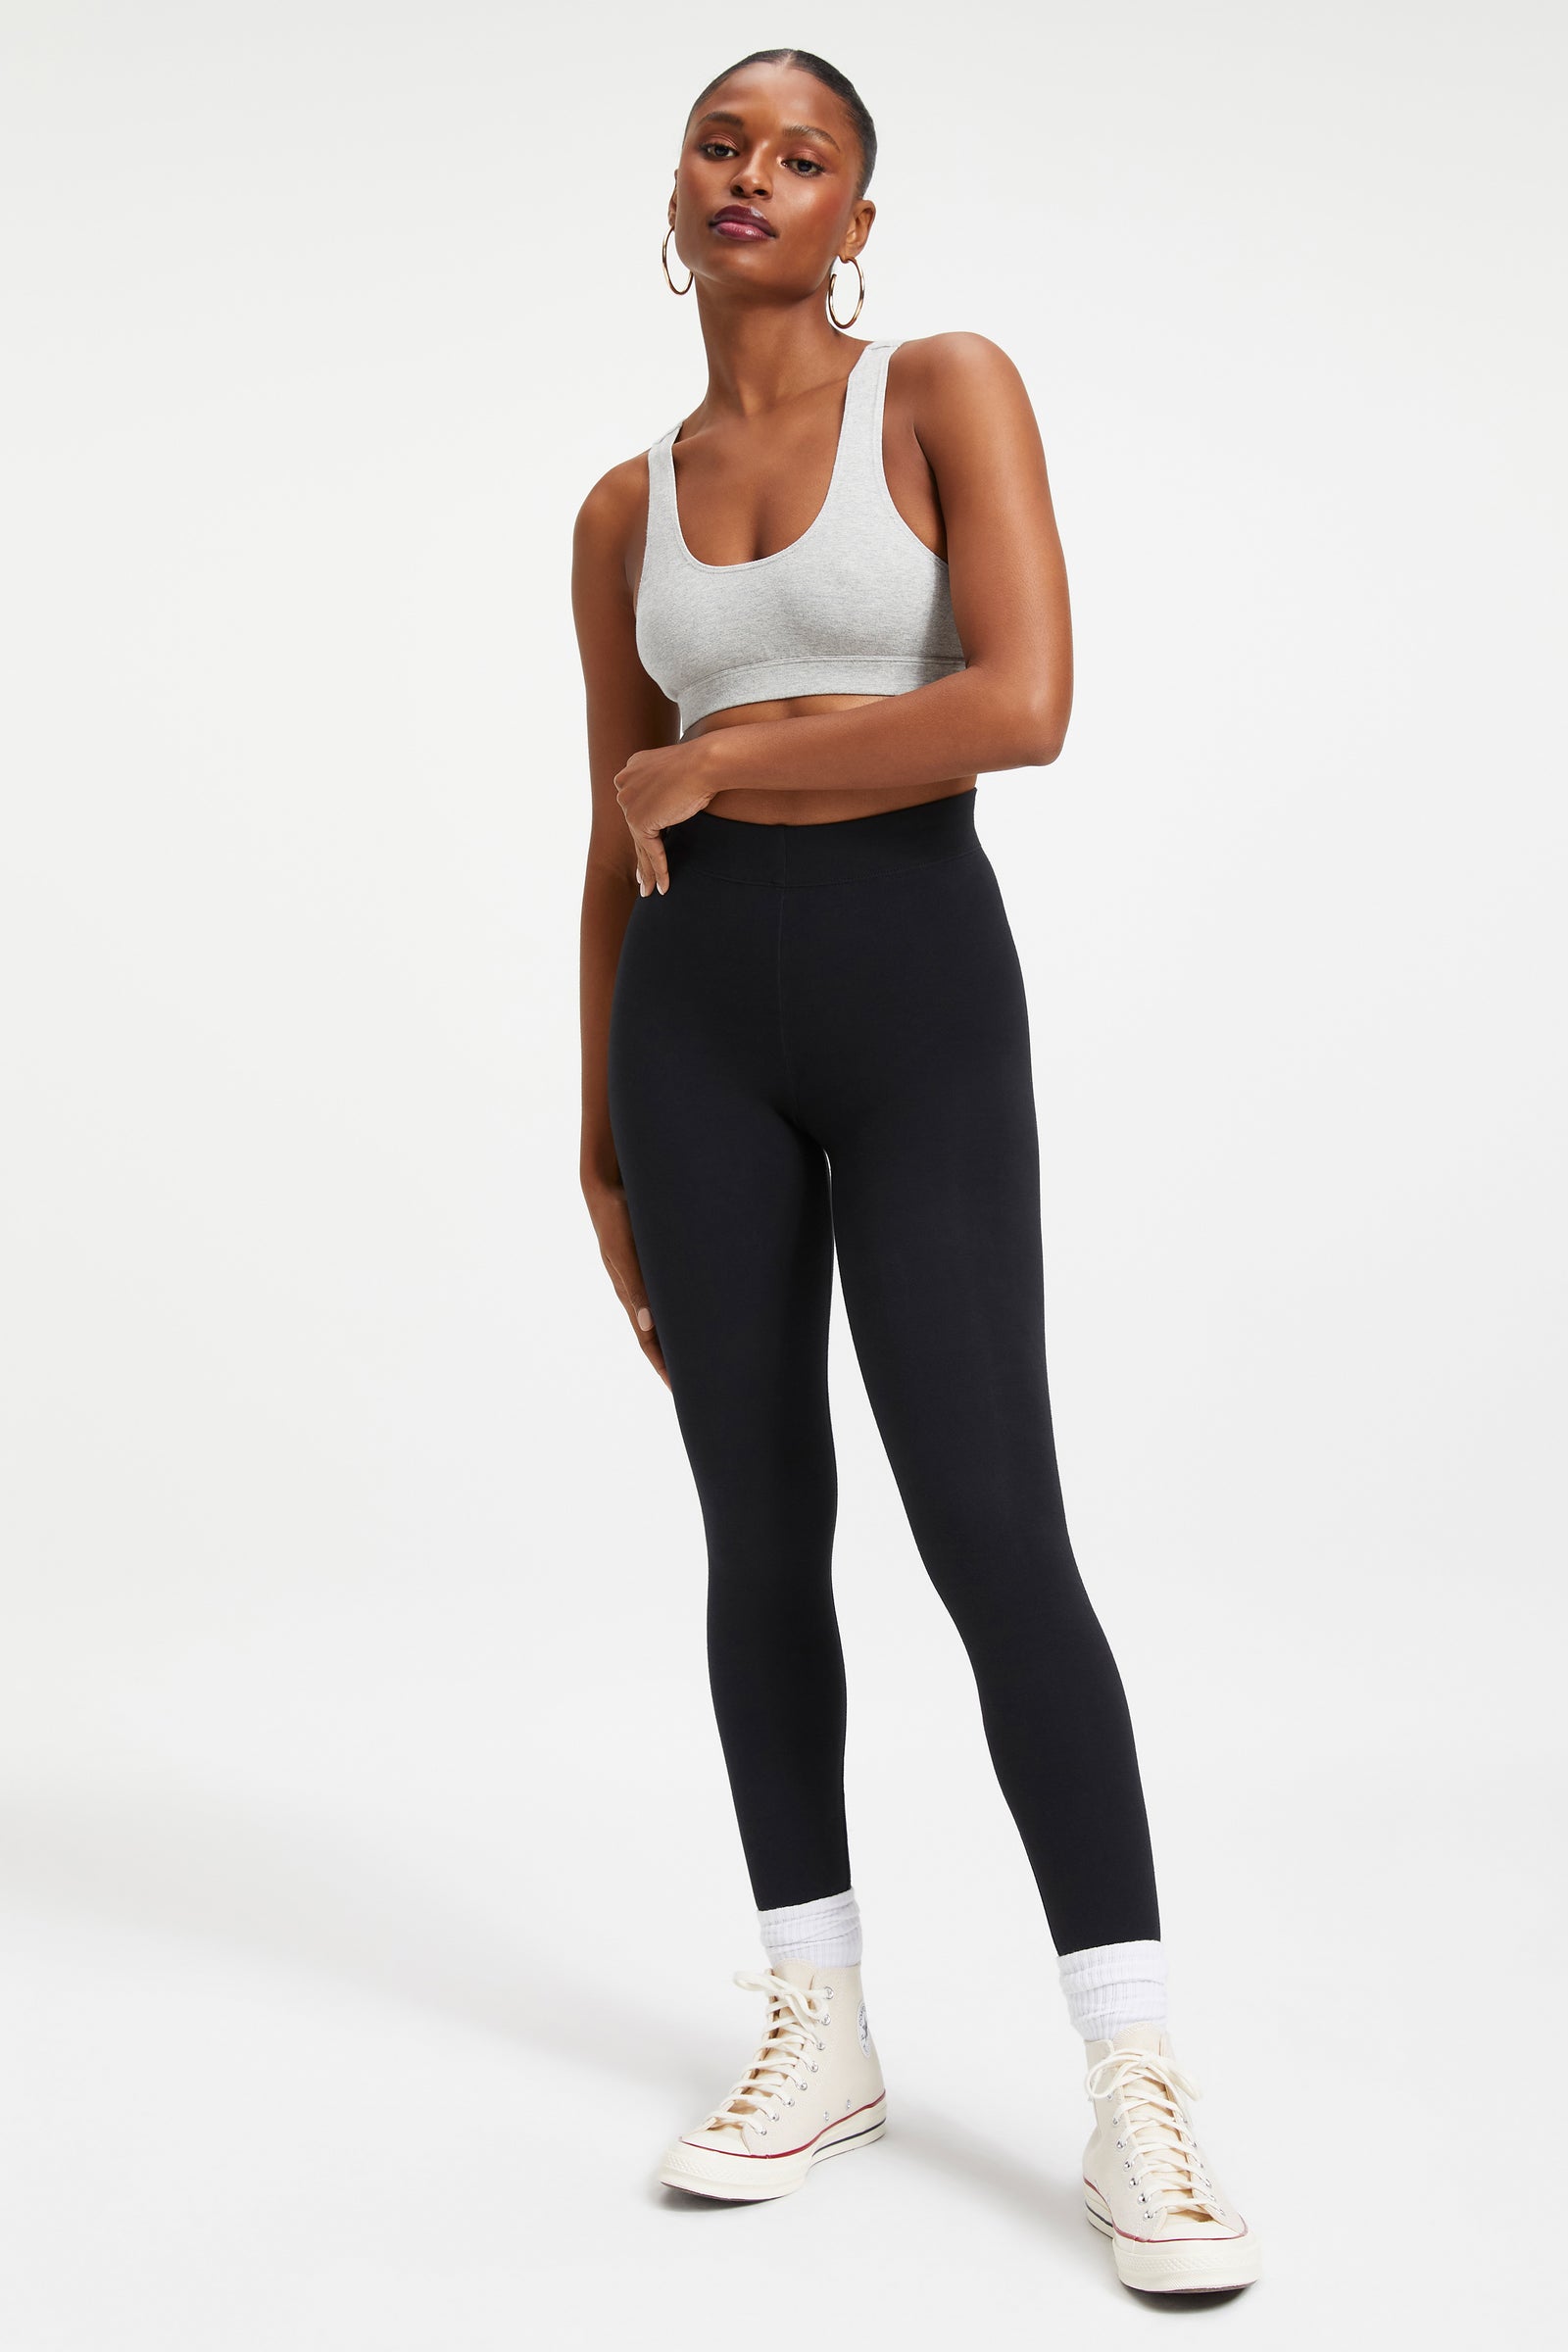 The 25 Best High-Waisted Workout Leggings in 2023 | Marie Claire